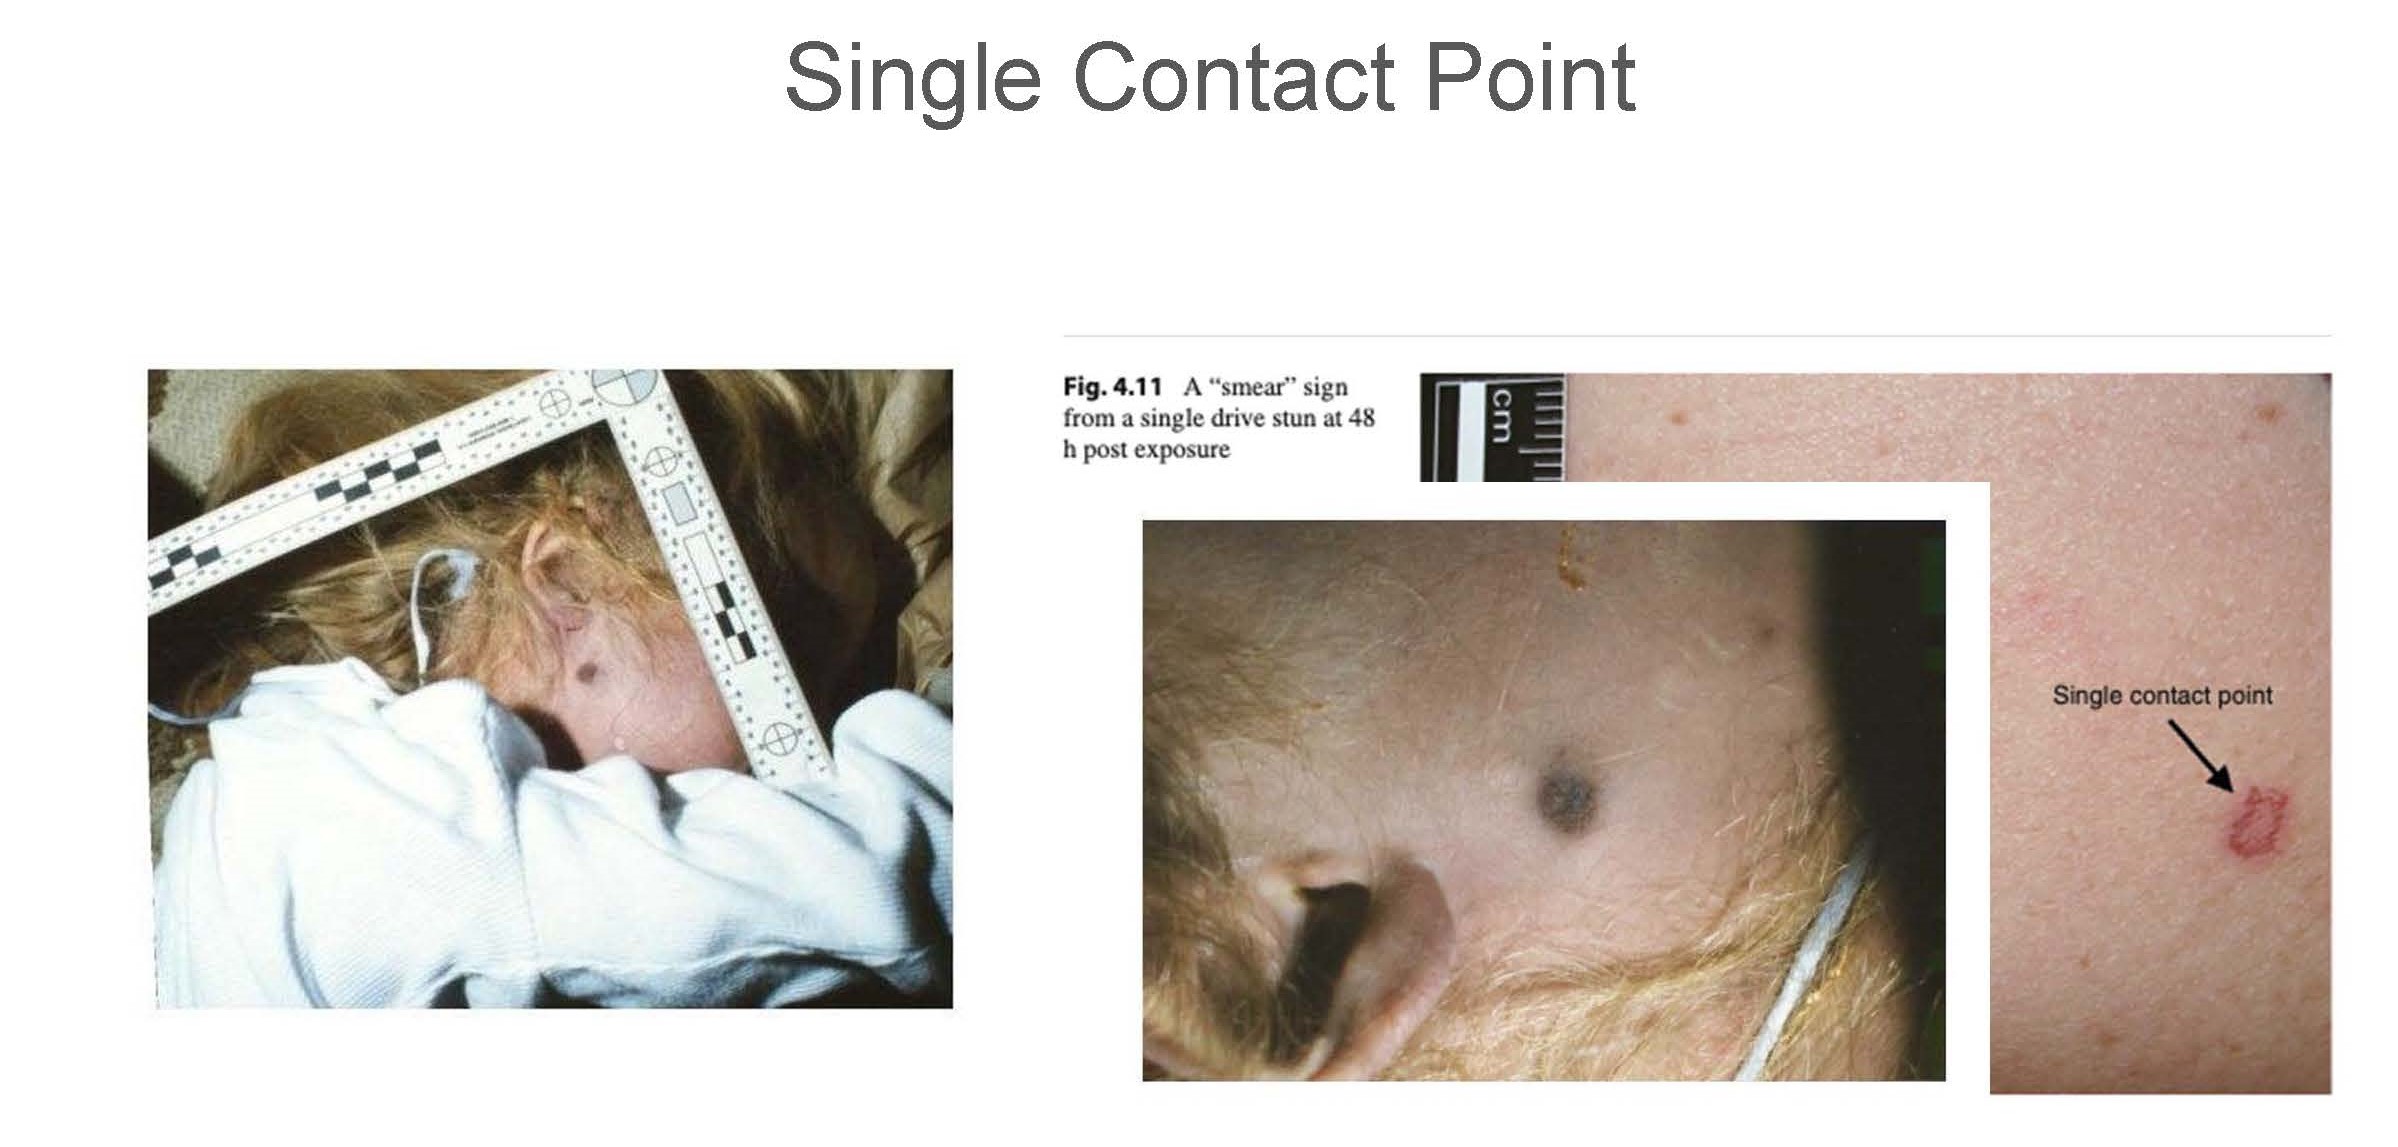 Single Contact Point